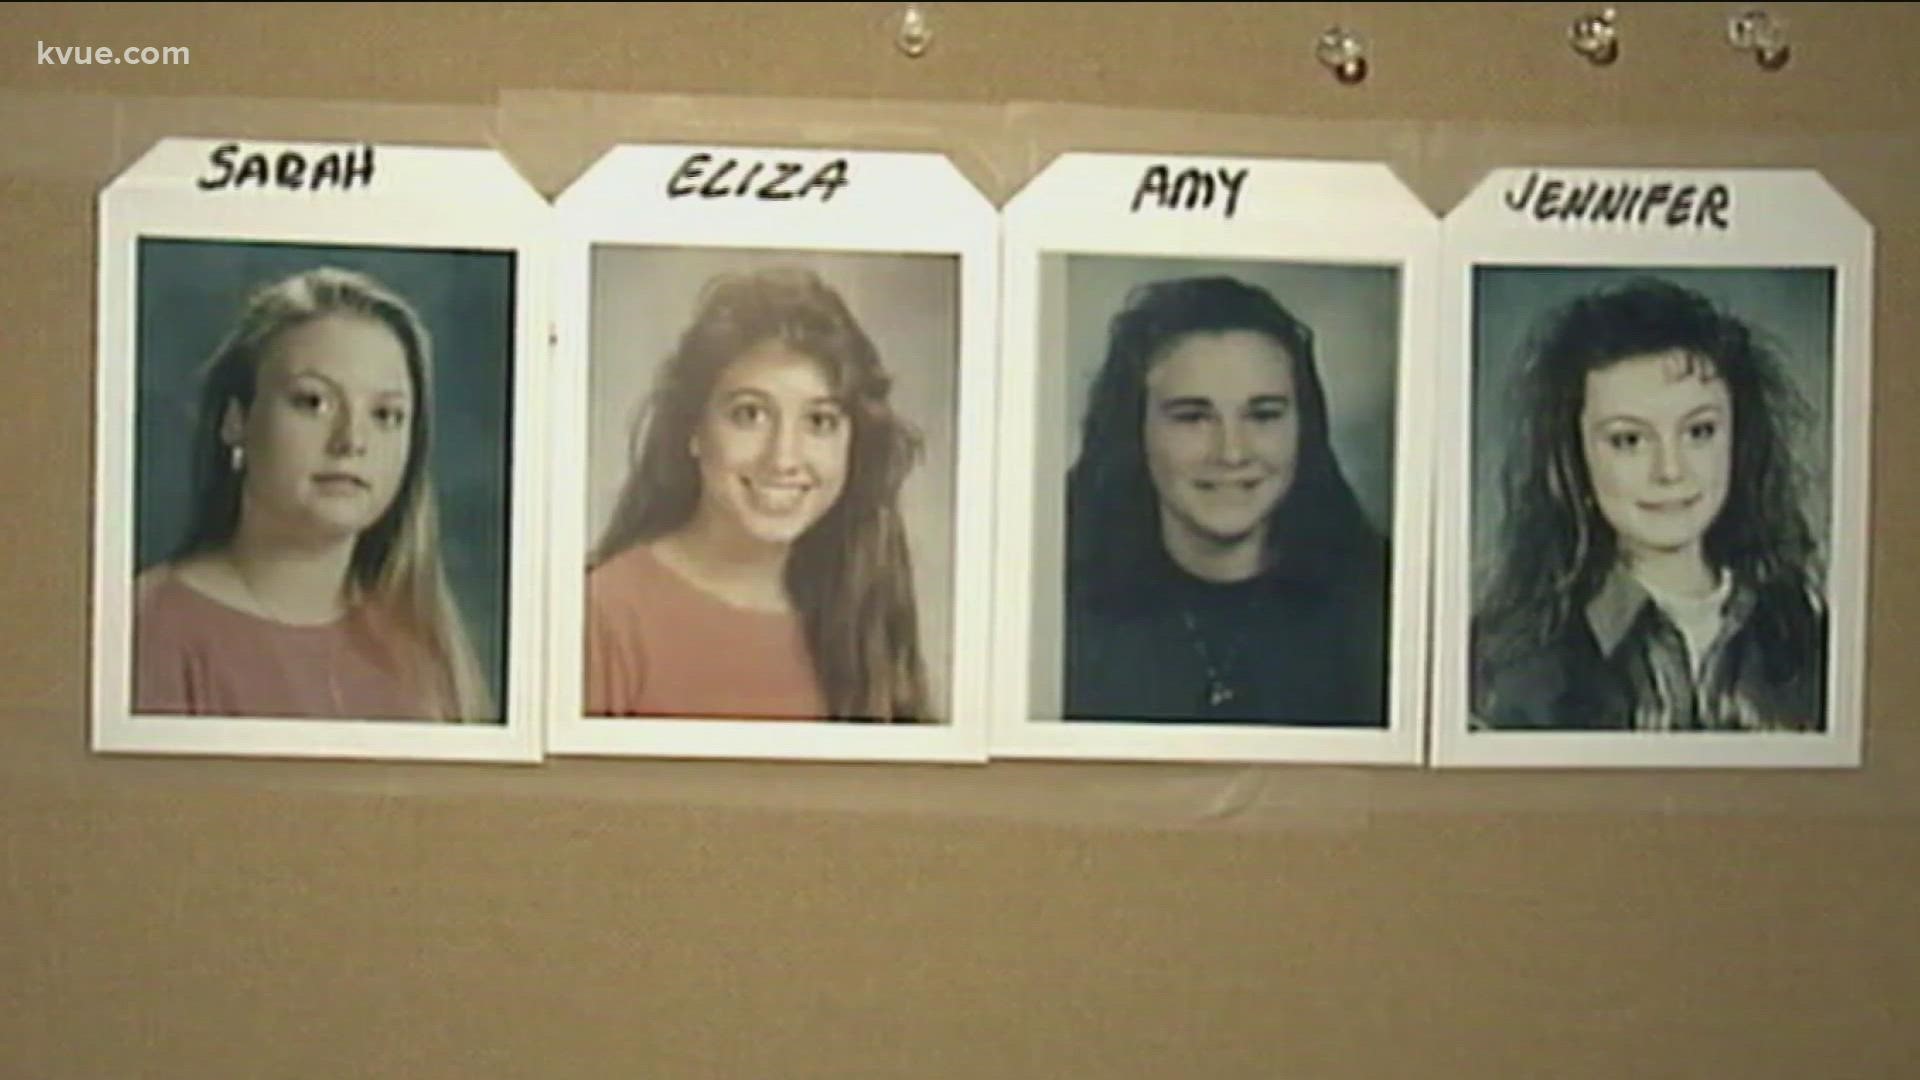 Four teenage girls were bound, gagged and shot in the head in an "I Can't Believe It's Yogurt" shop in 1991. The case today has more questions than answers.